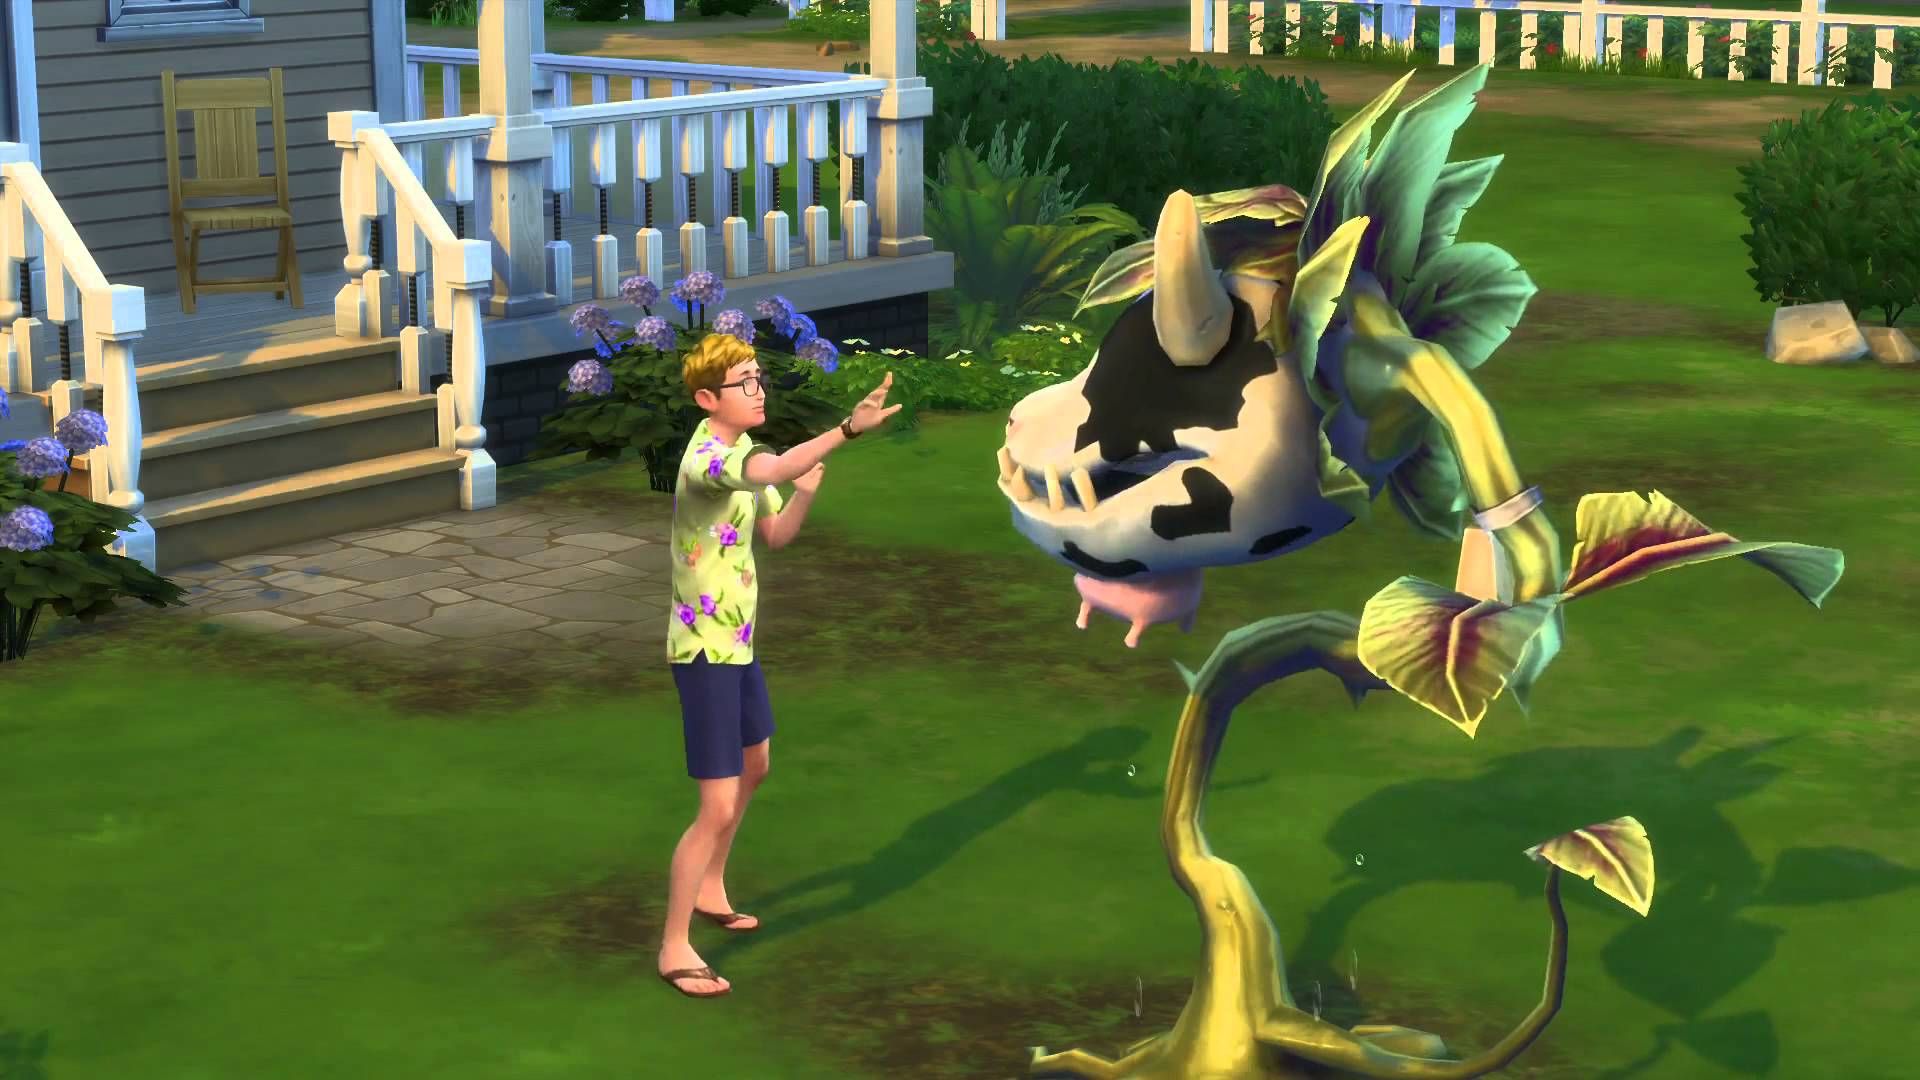 A sim getting a little too close to a cowplant.